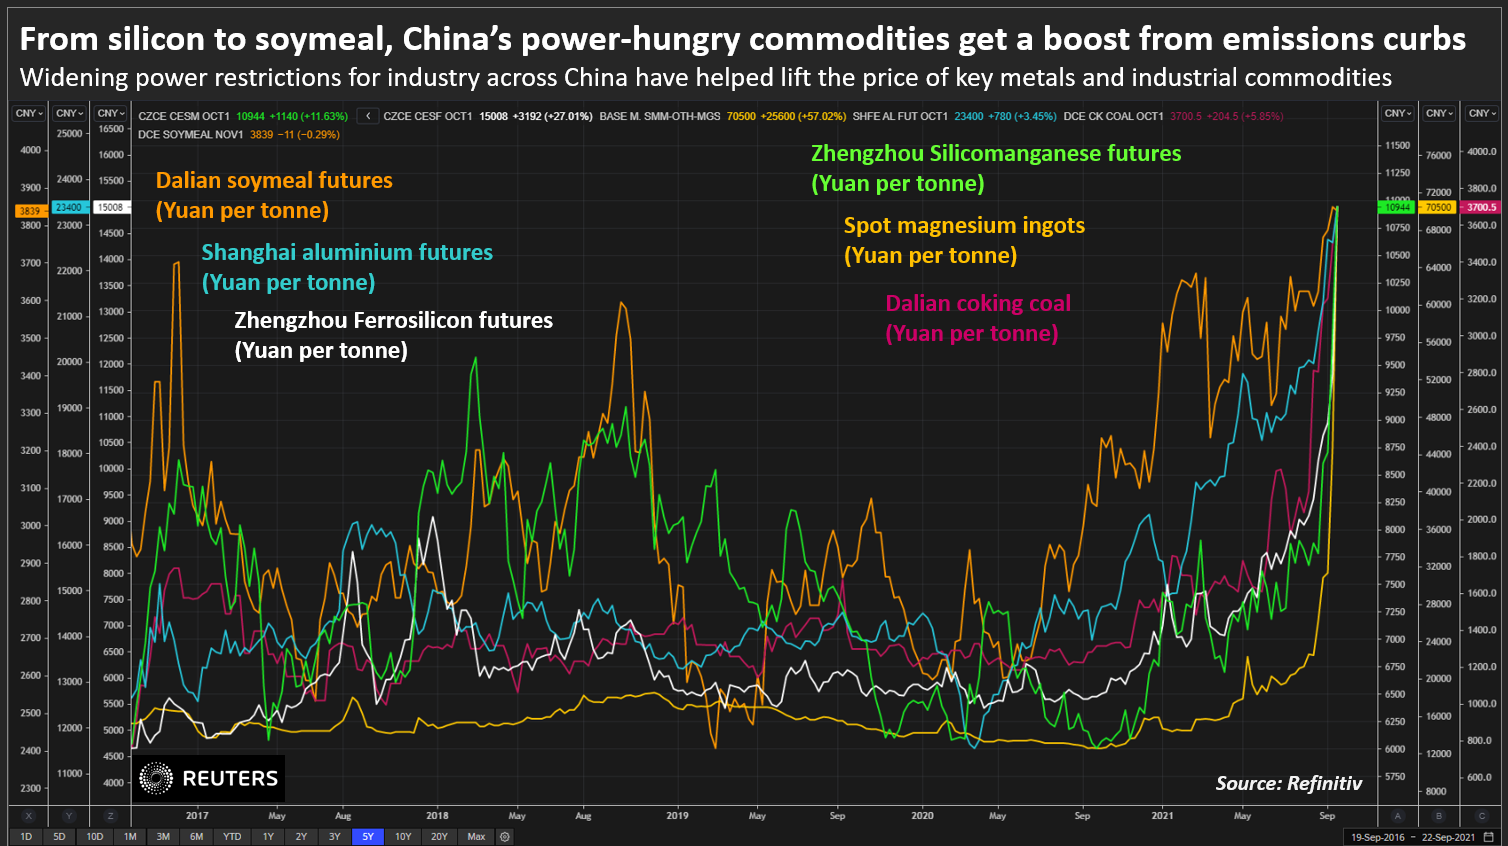 From silicon to soymeal, China’s power-hungry commodities get a boost from emissions curbs